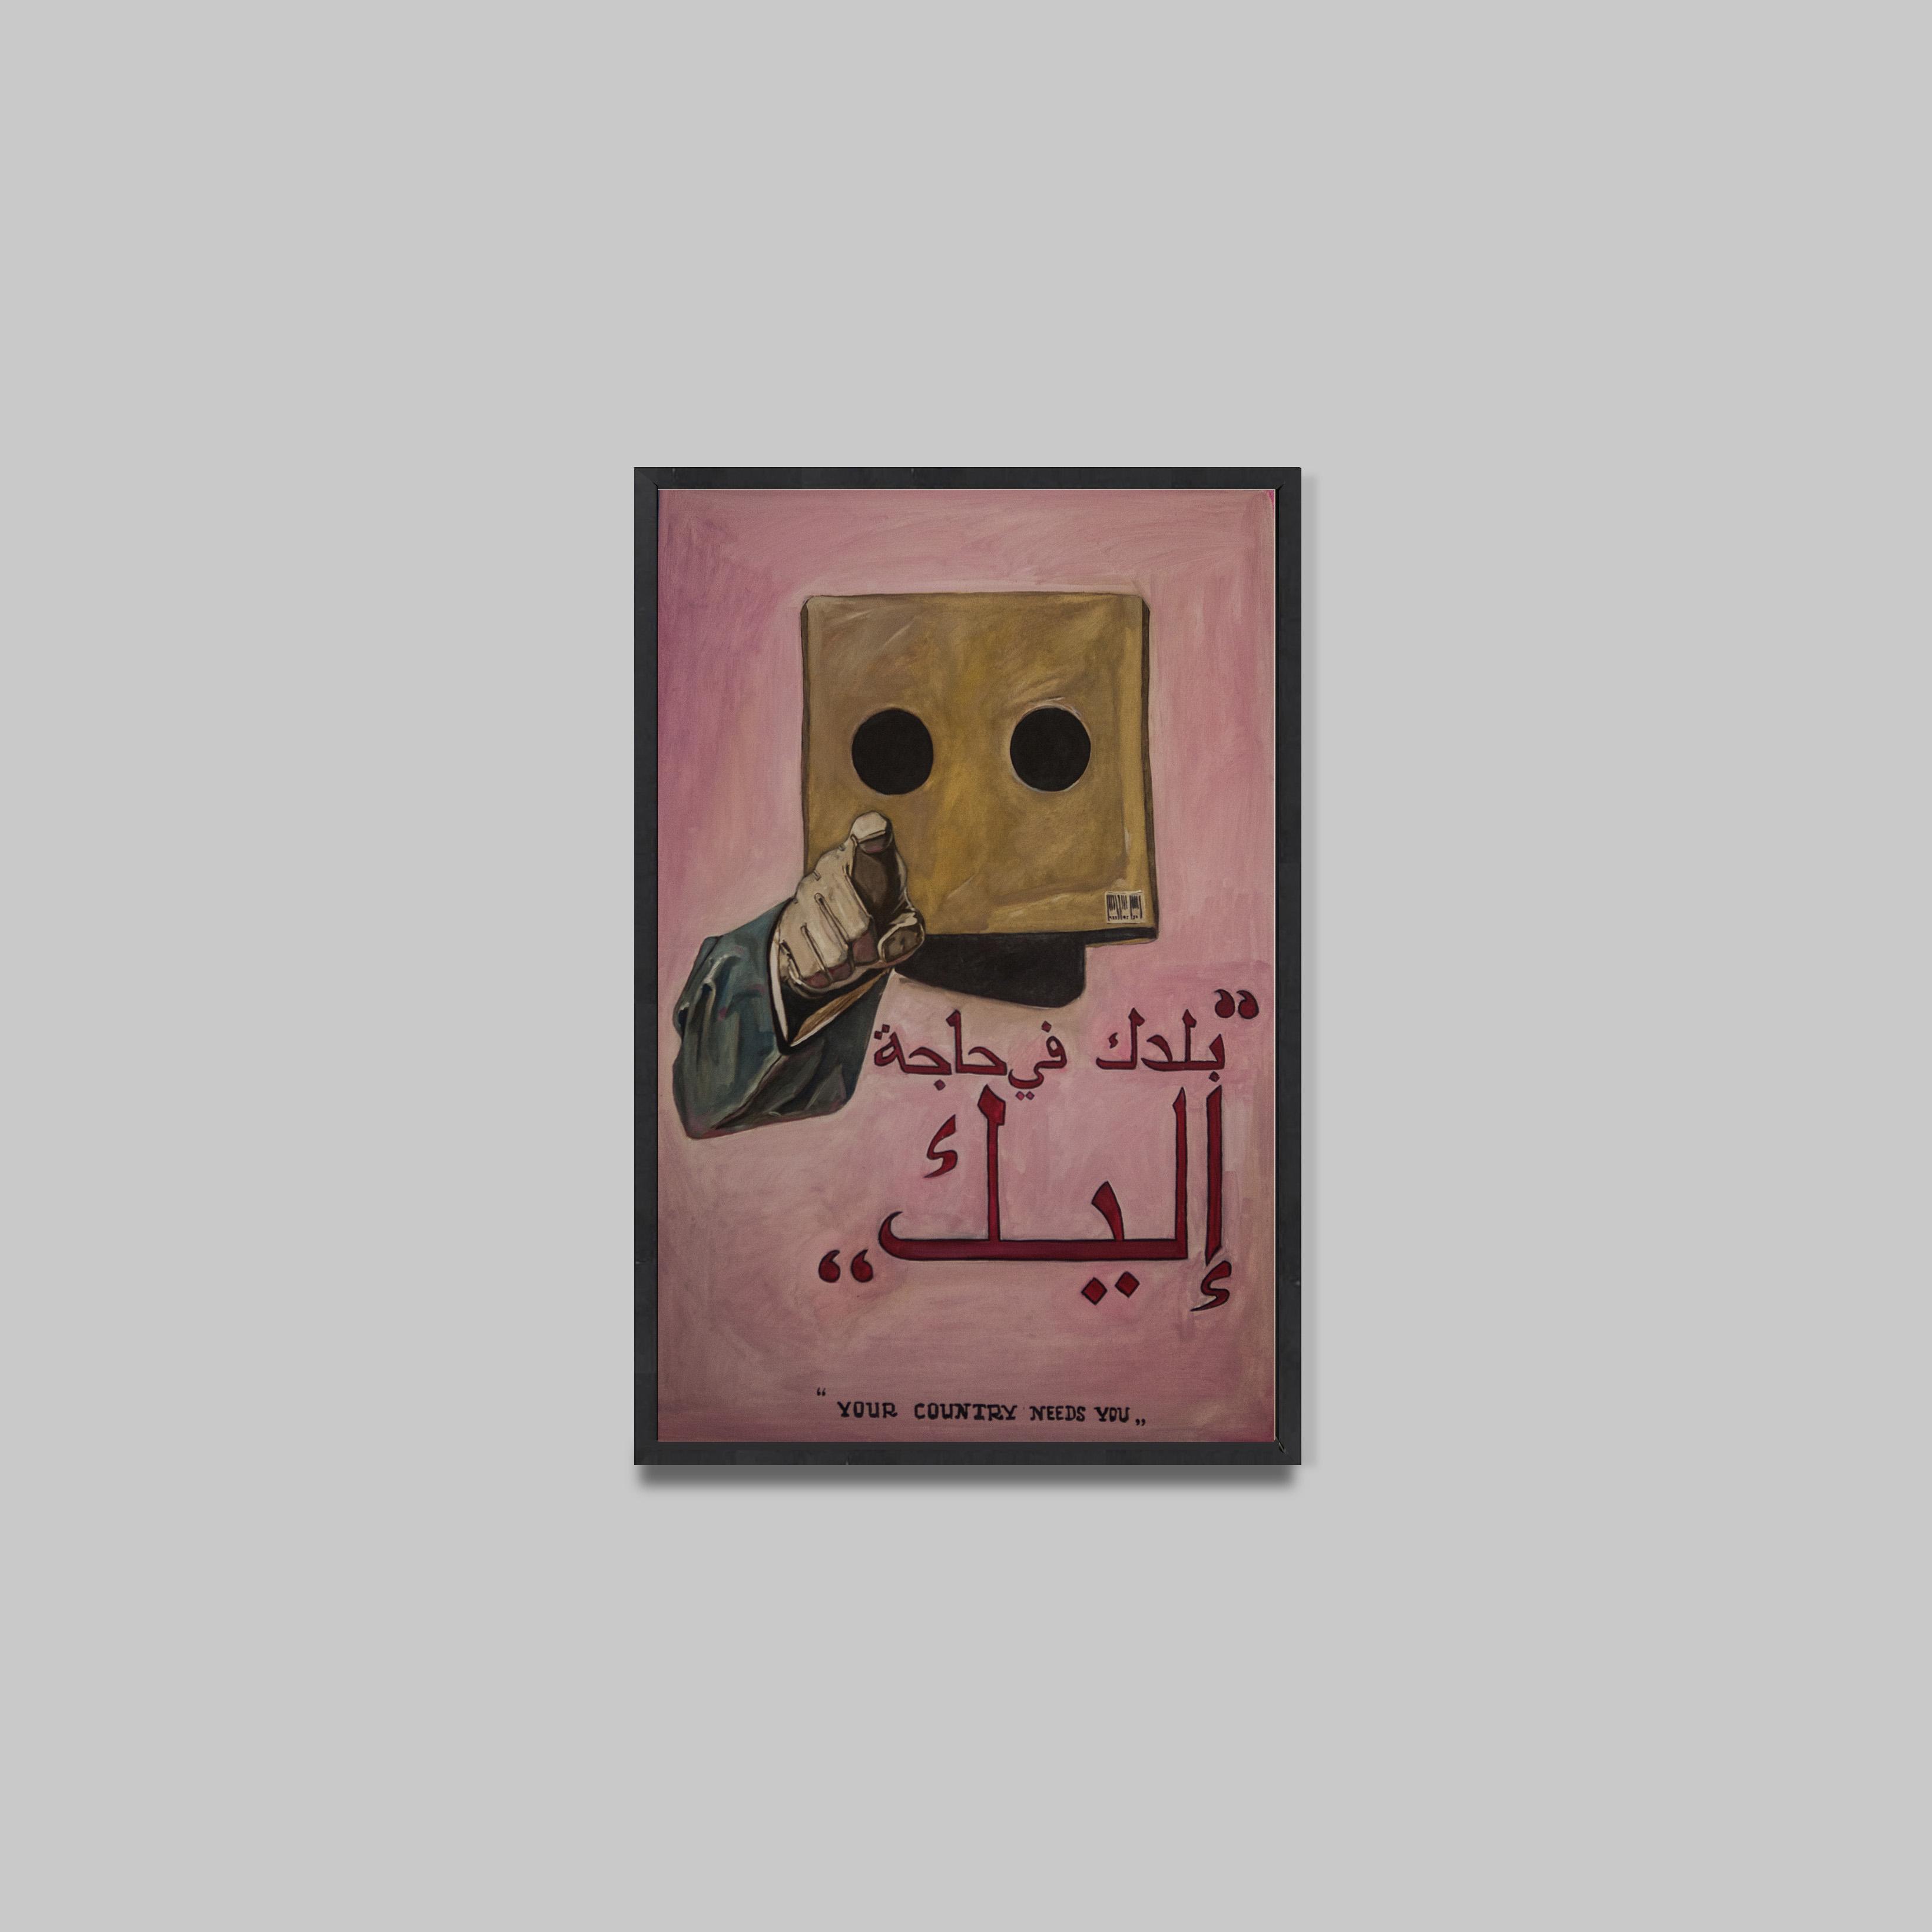 Mohammed Saïd Chair
Your country needs you
Acrylique sur toile
71 x 100 cm